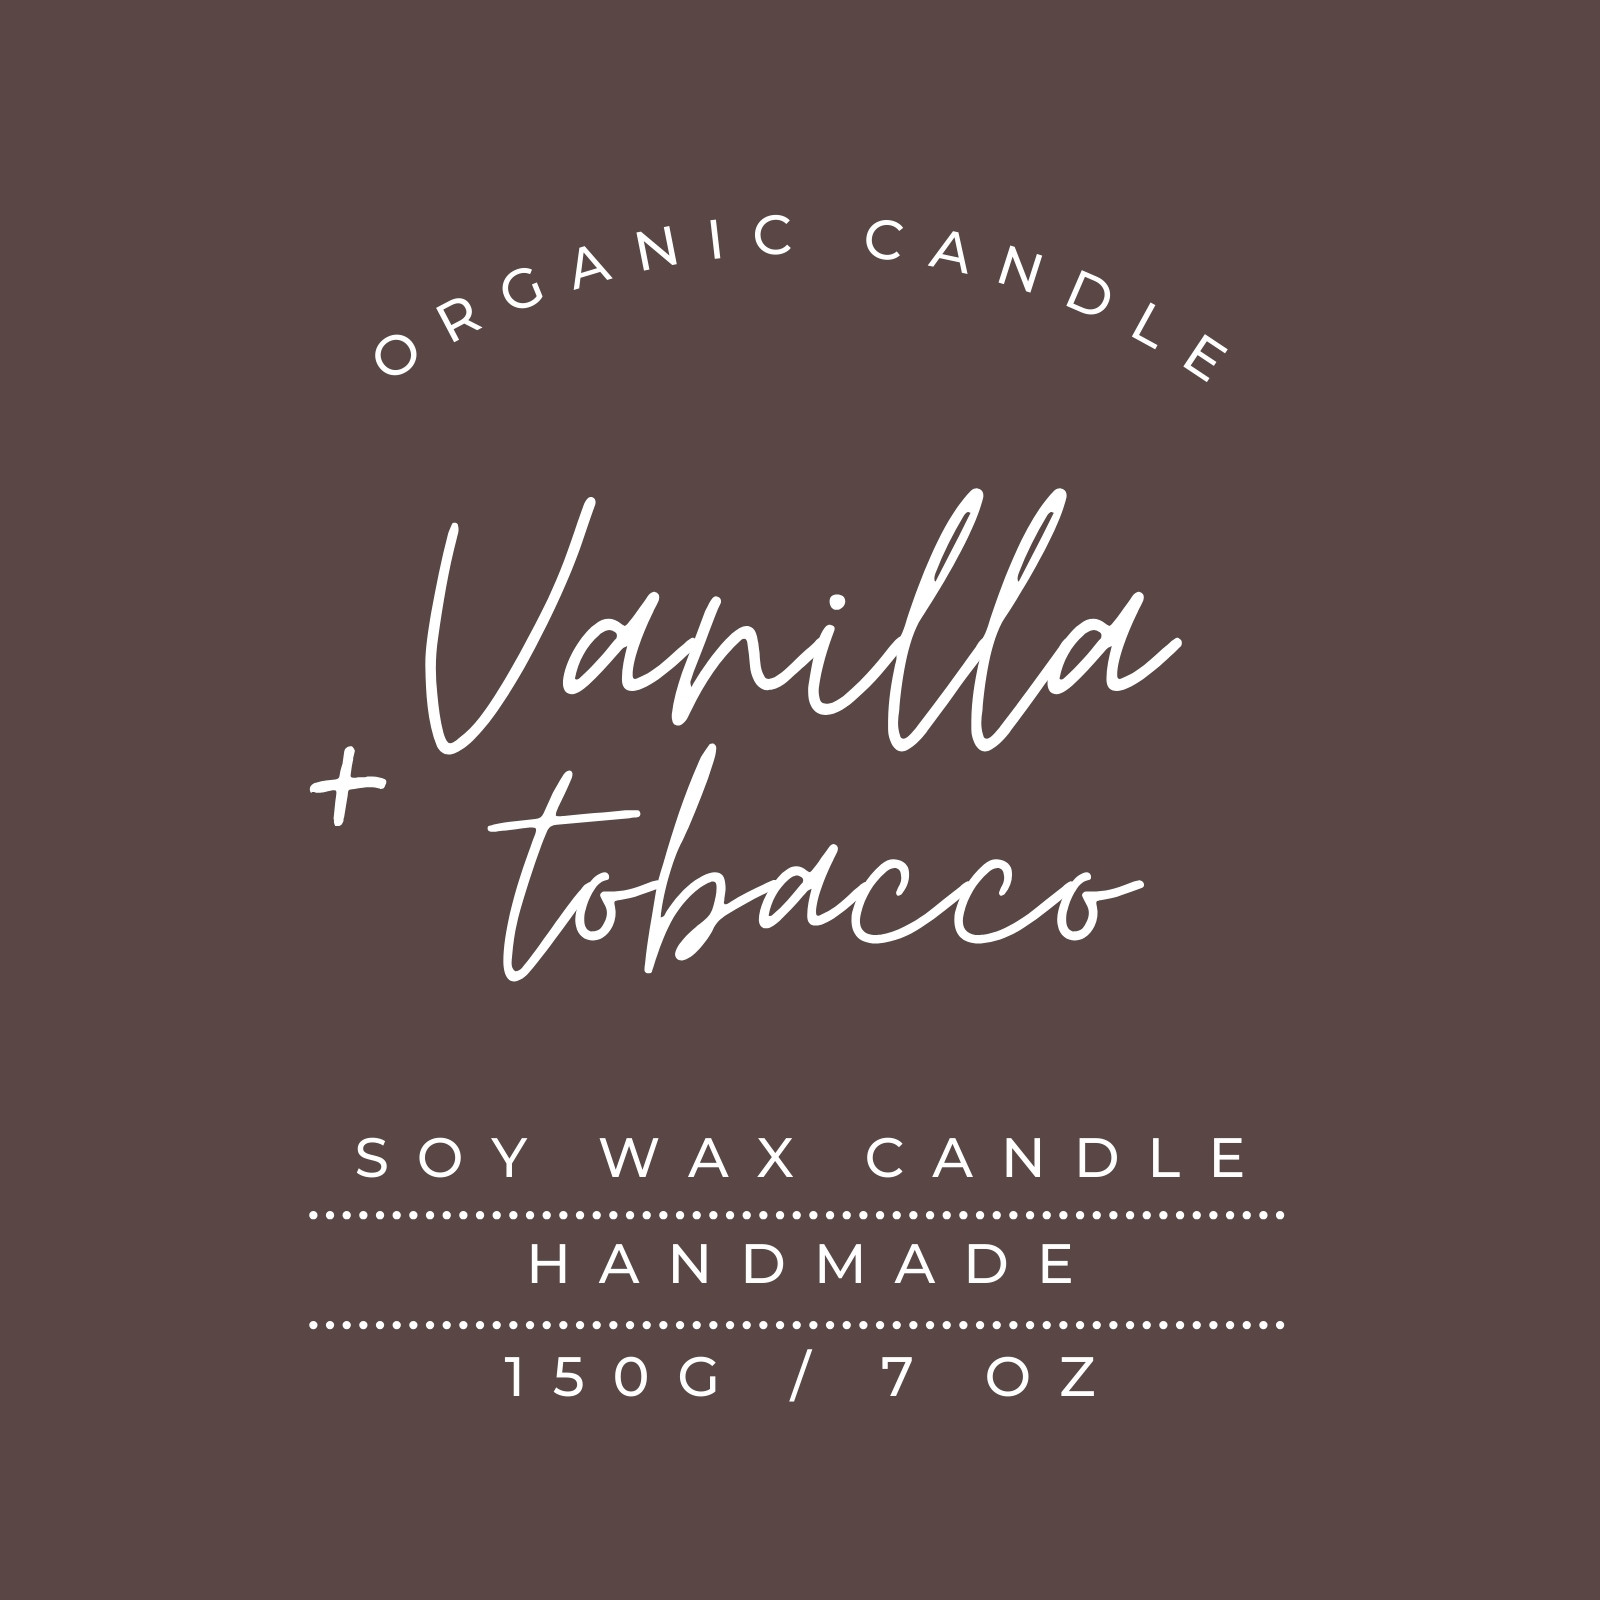 Luxury Candle Label Template Candle Label Sticker Candle Warning Label  Candle Safety Sticker Candle DIY Label Canva Product Label Printable -   Canada